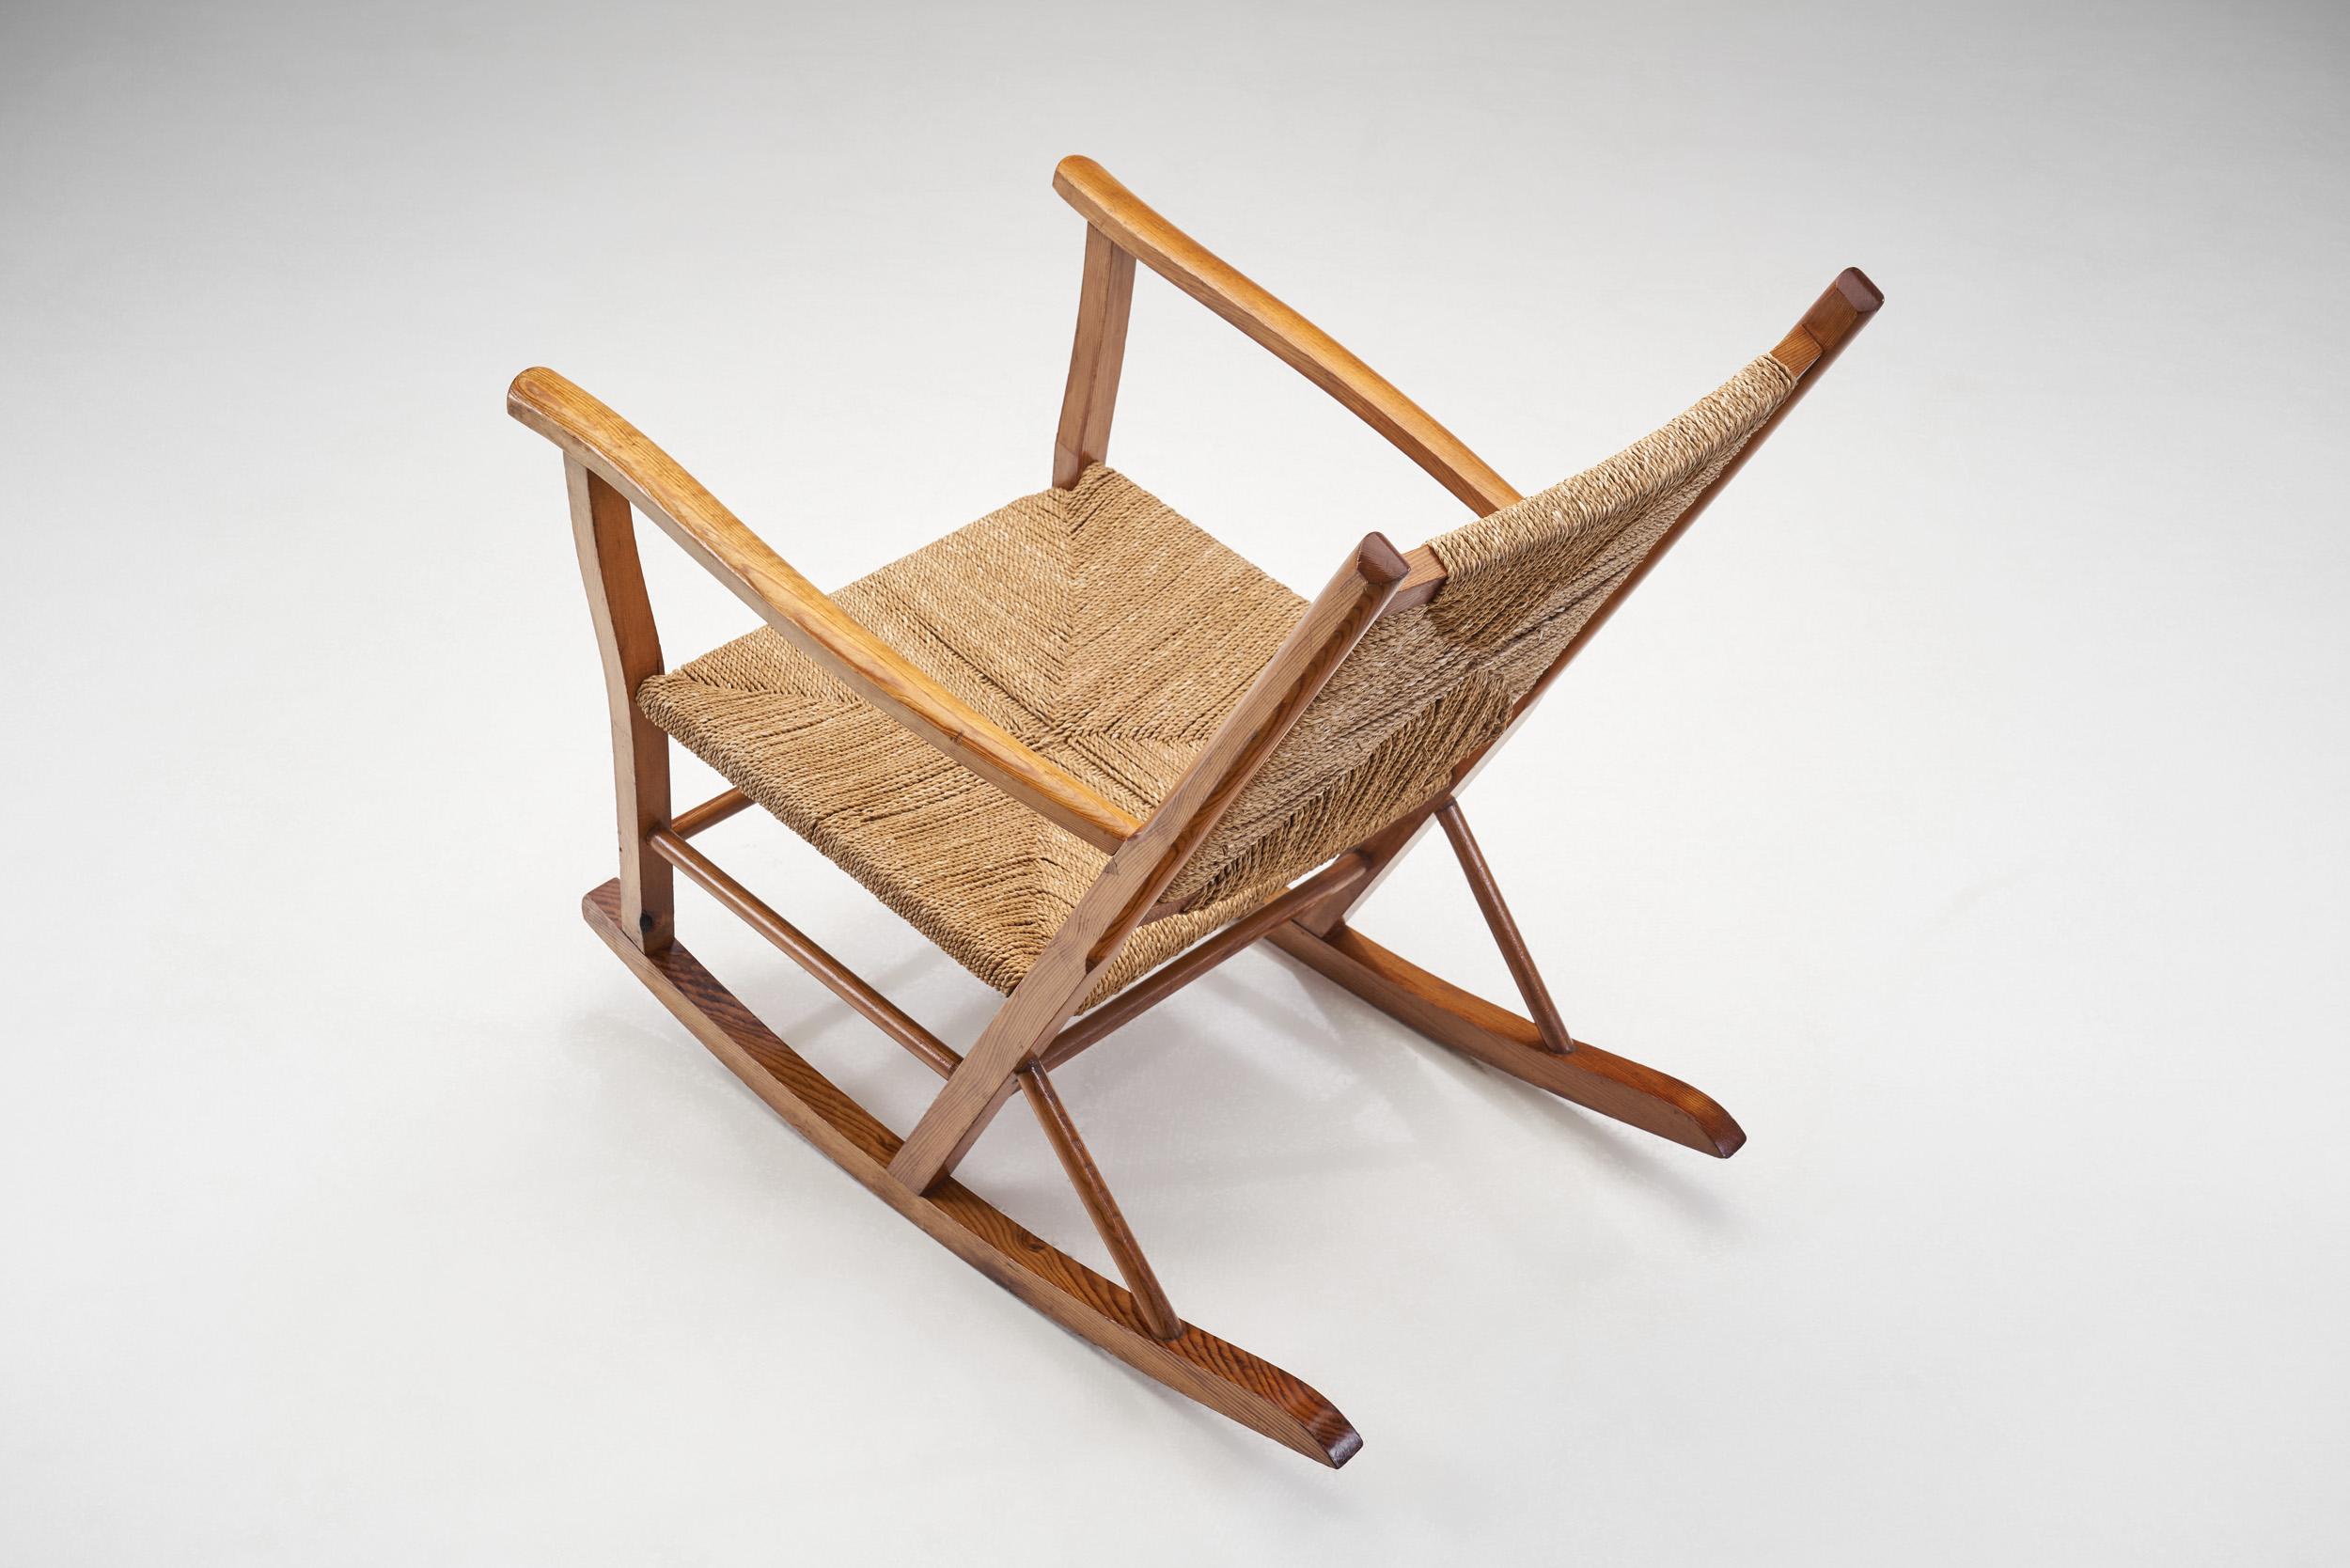 Mid-20th Century Norwegian Wood and Papercord Rocking Chair by Slåke Møbelfabrik, Norway 1940s